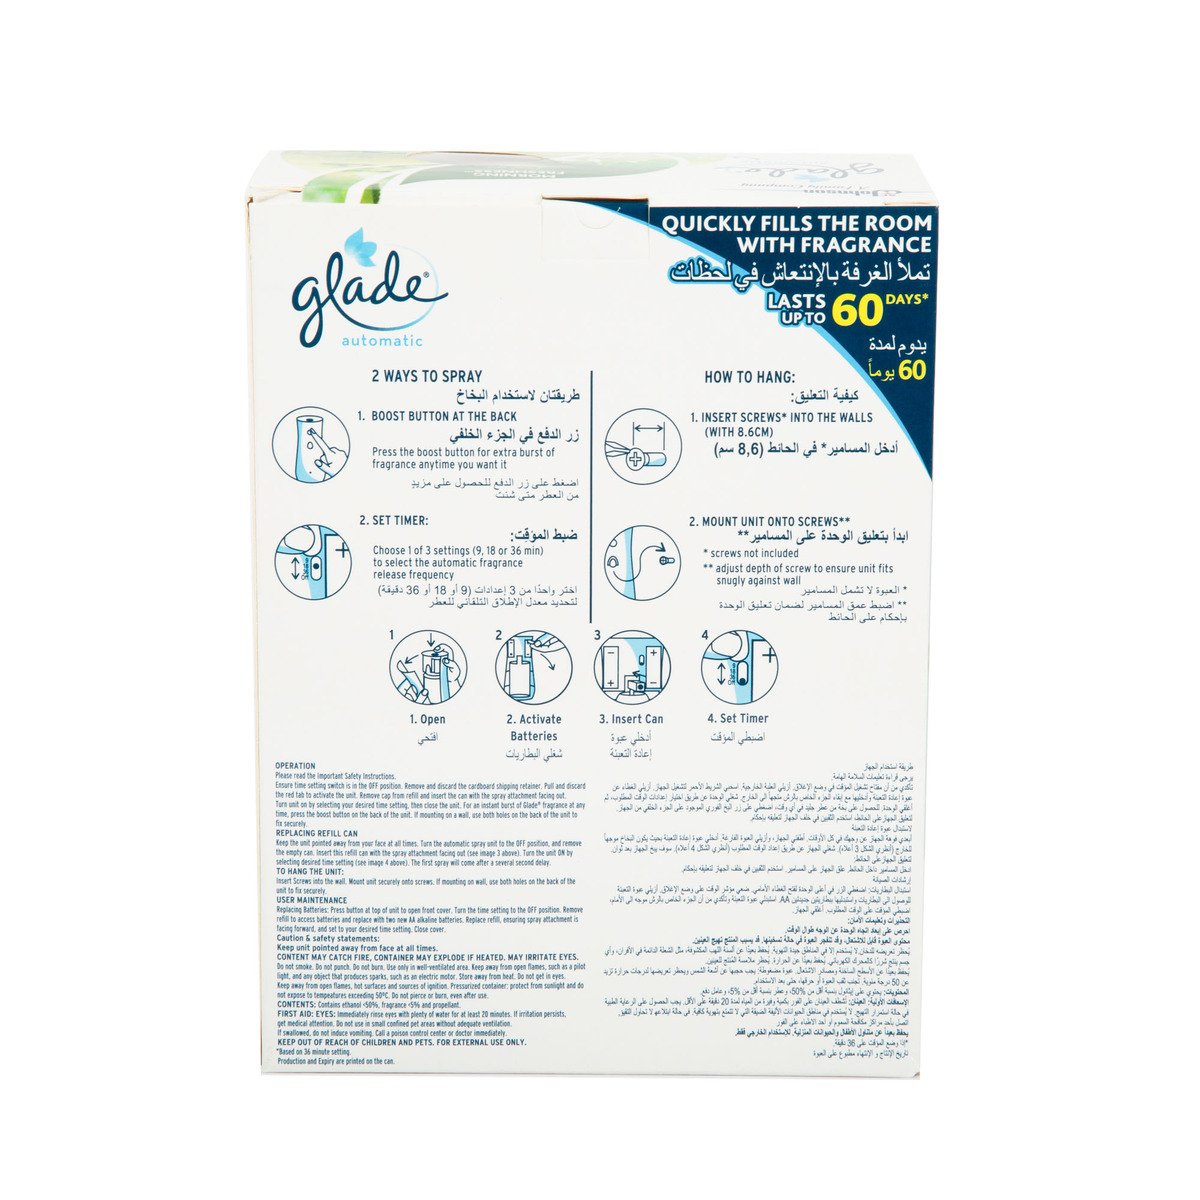 Glade 3in1 Automatic Spray Unit + Morning Freshness Refill Value Pack 175g